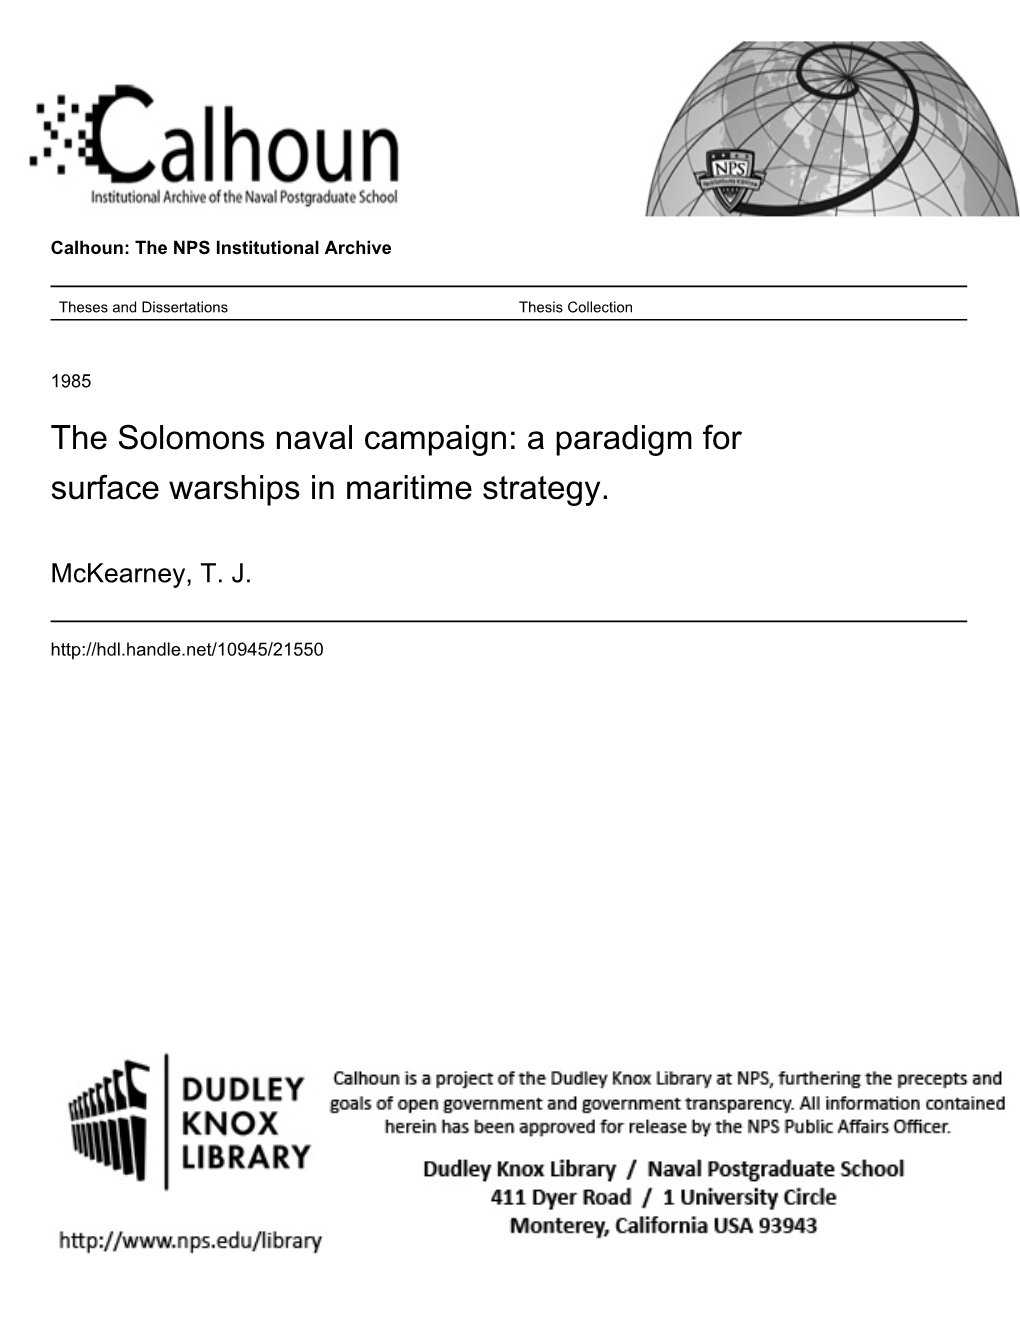 The Solomons Naval Campaign: a Paradigm for Surface Warships in Maritime Strategy